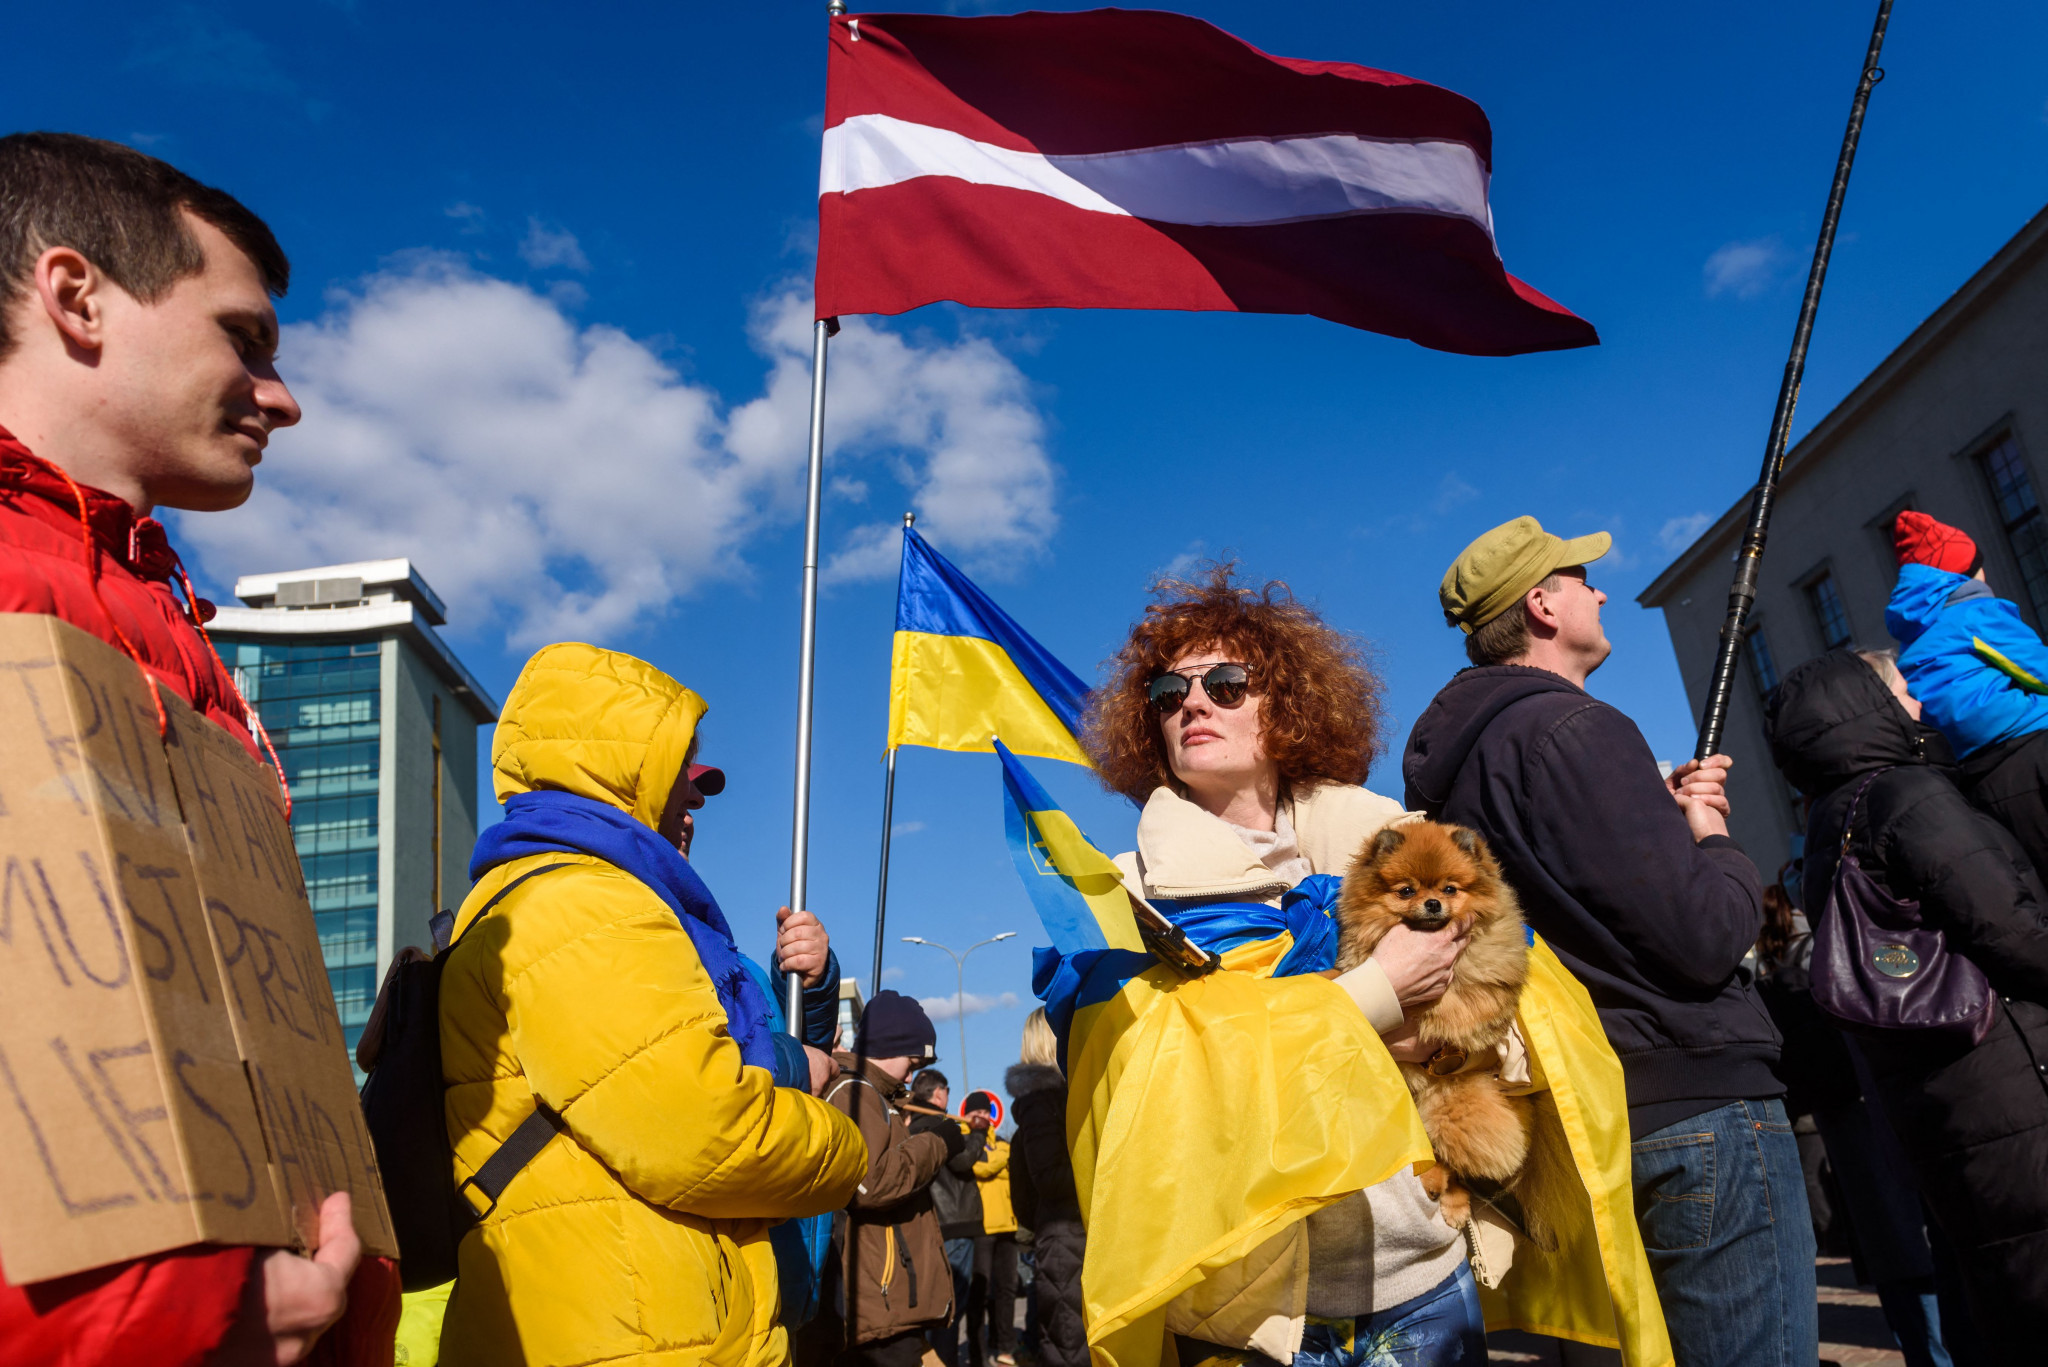 Latvians are showing solidarity with Ukraine in a letter signed by dozens of sports journalists ©Getty Images